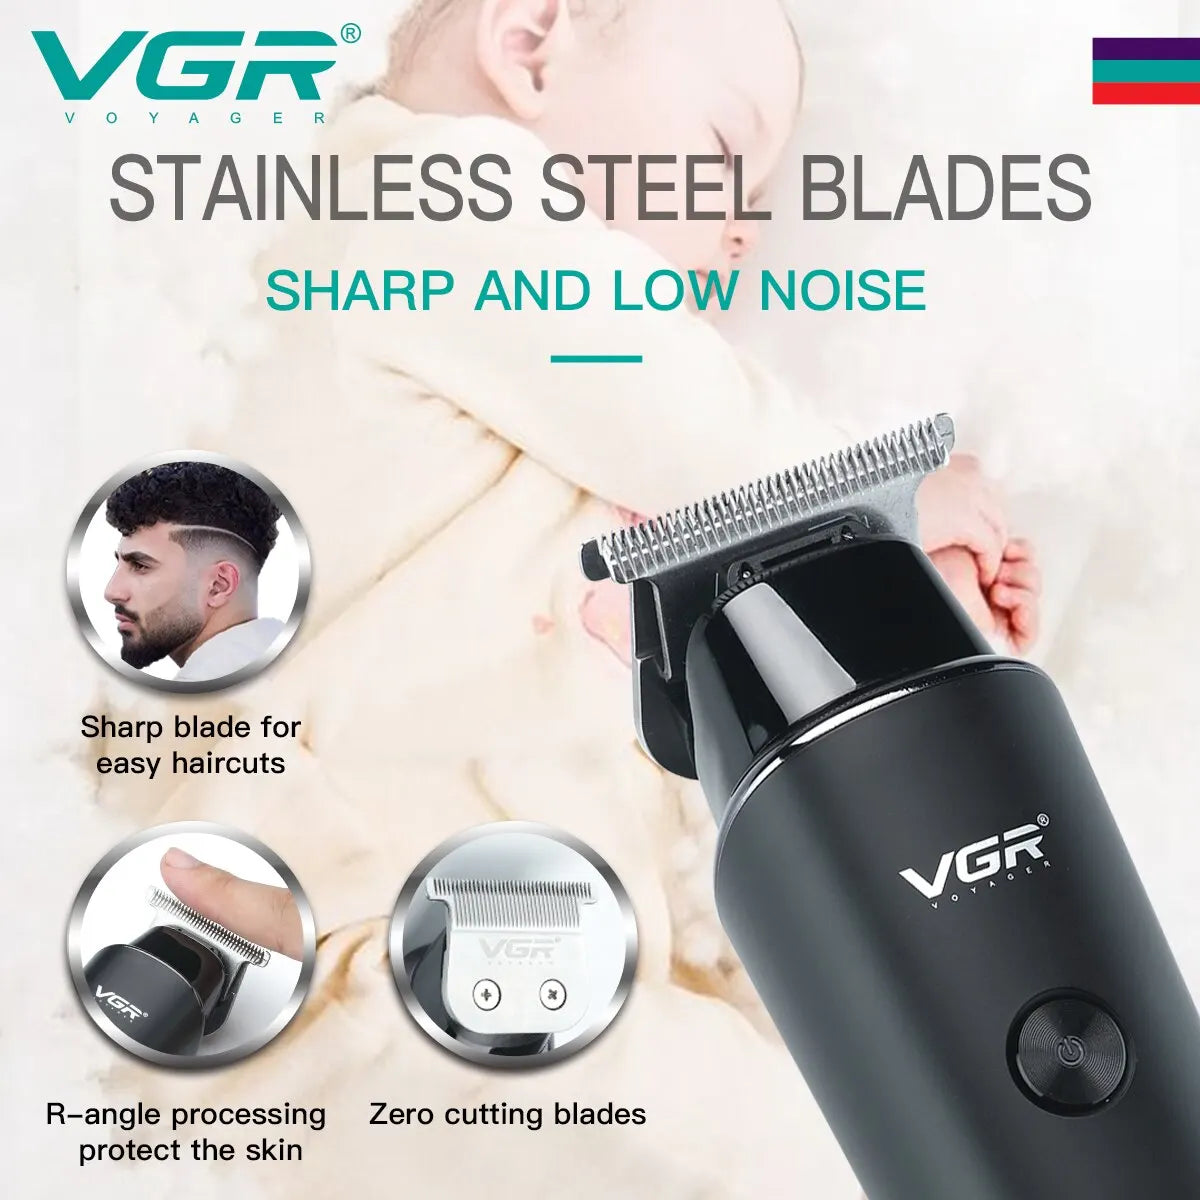   VGR Hair Trimmer Professional Electric Trimmers Cordless Hair Clipper Rechargeable LED Display V 937  hair trimmer   EUR Brandsonce   VGR Brandsonce Brandsonce